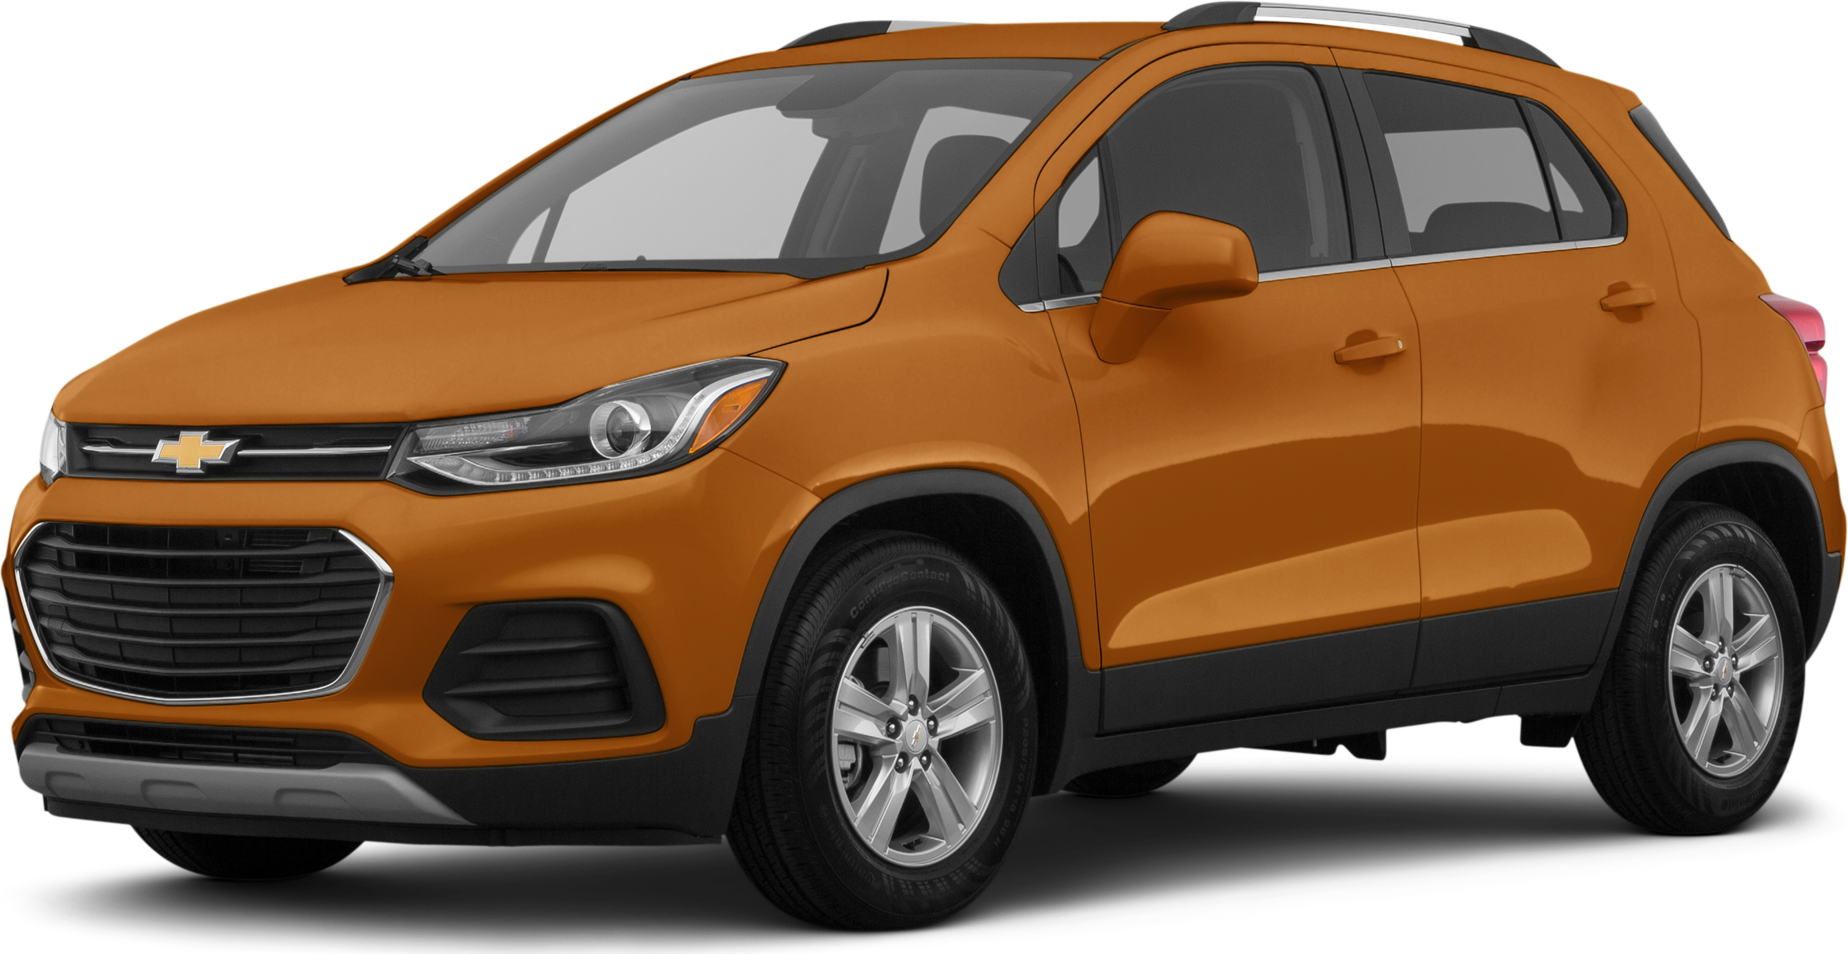 2020 Chevy Trax Trade In Value